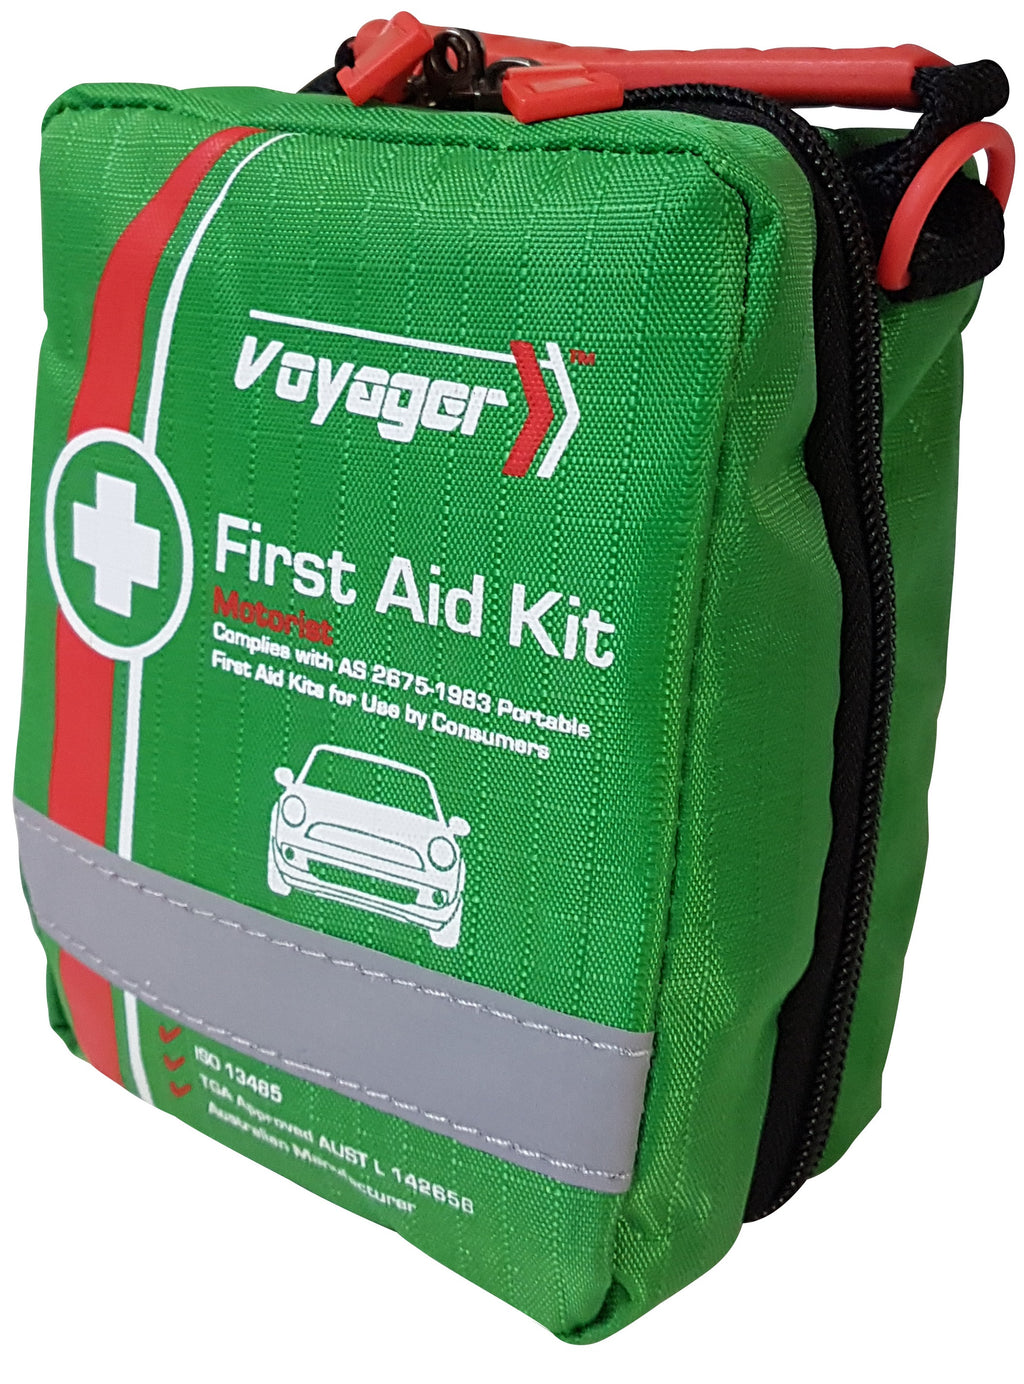 Maxisafe ‘Work Vehicle’ First Aid Kit